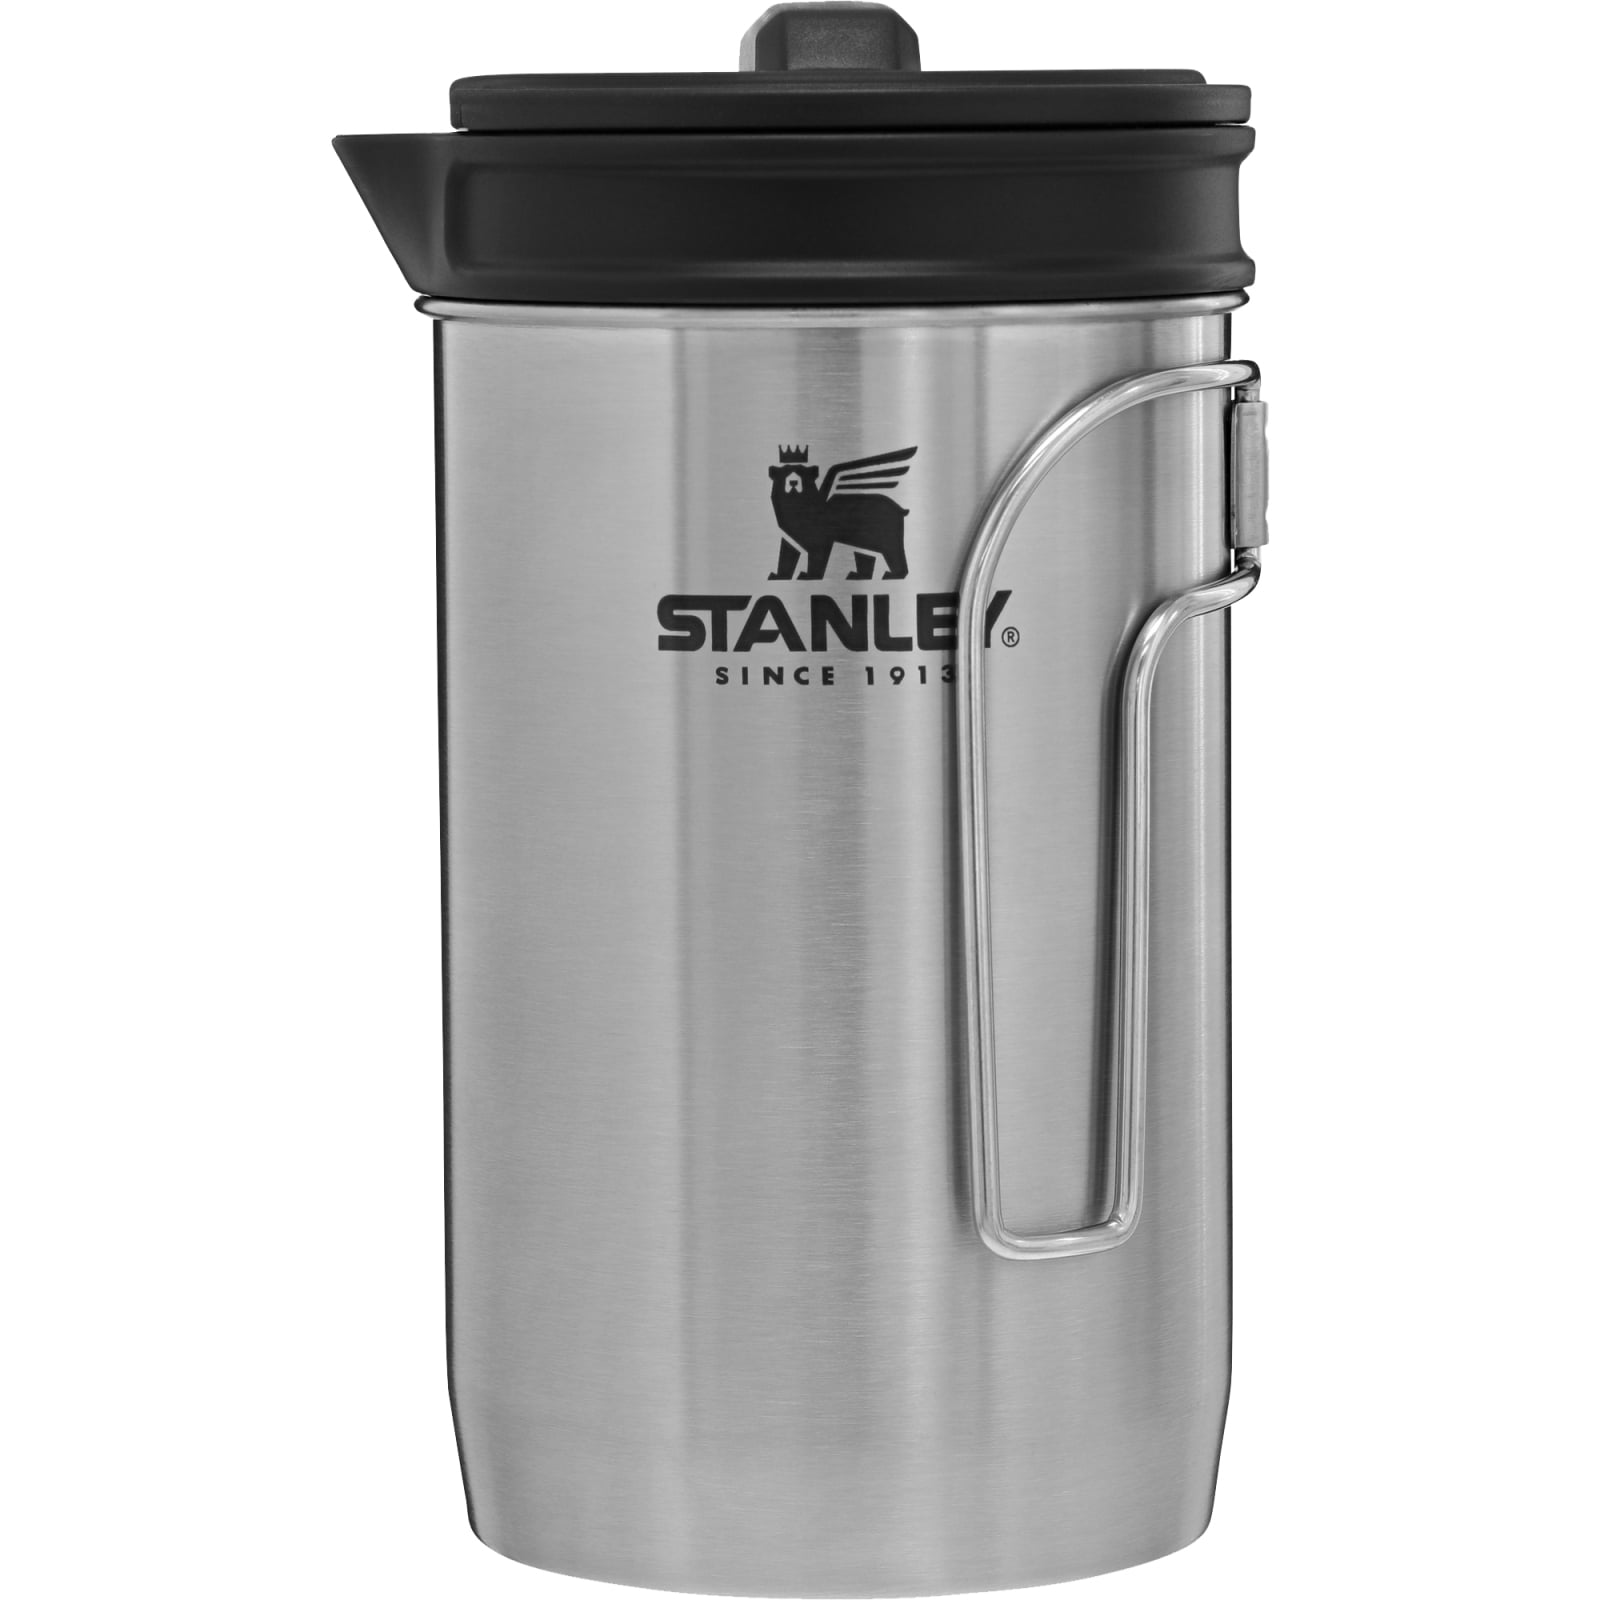 Stanley Adventure All-In-One Boil + Brew Camping French Press 32 Oz Stanley Stainless Steel Boil & Brew 32 Oz. Coffee Press